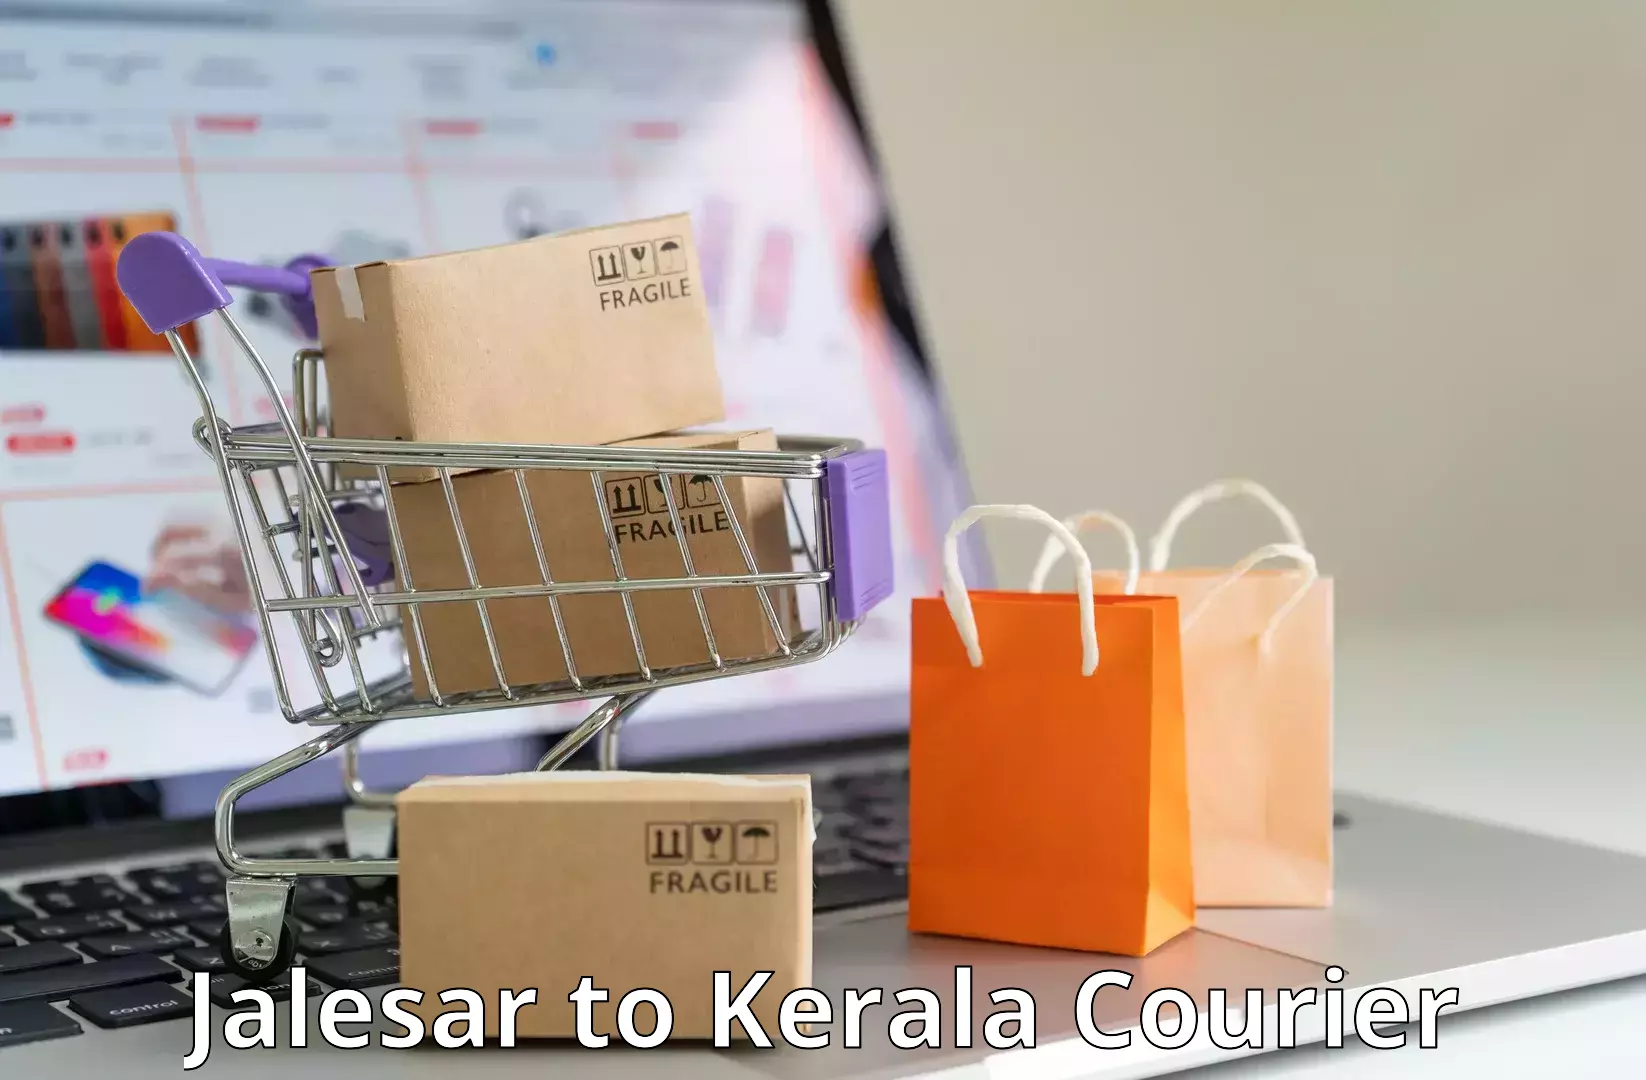 Domestic delivery options Jalesar to Thrissur